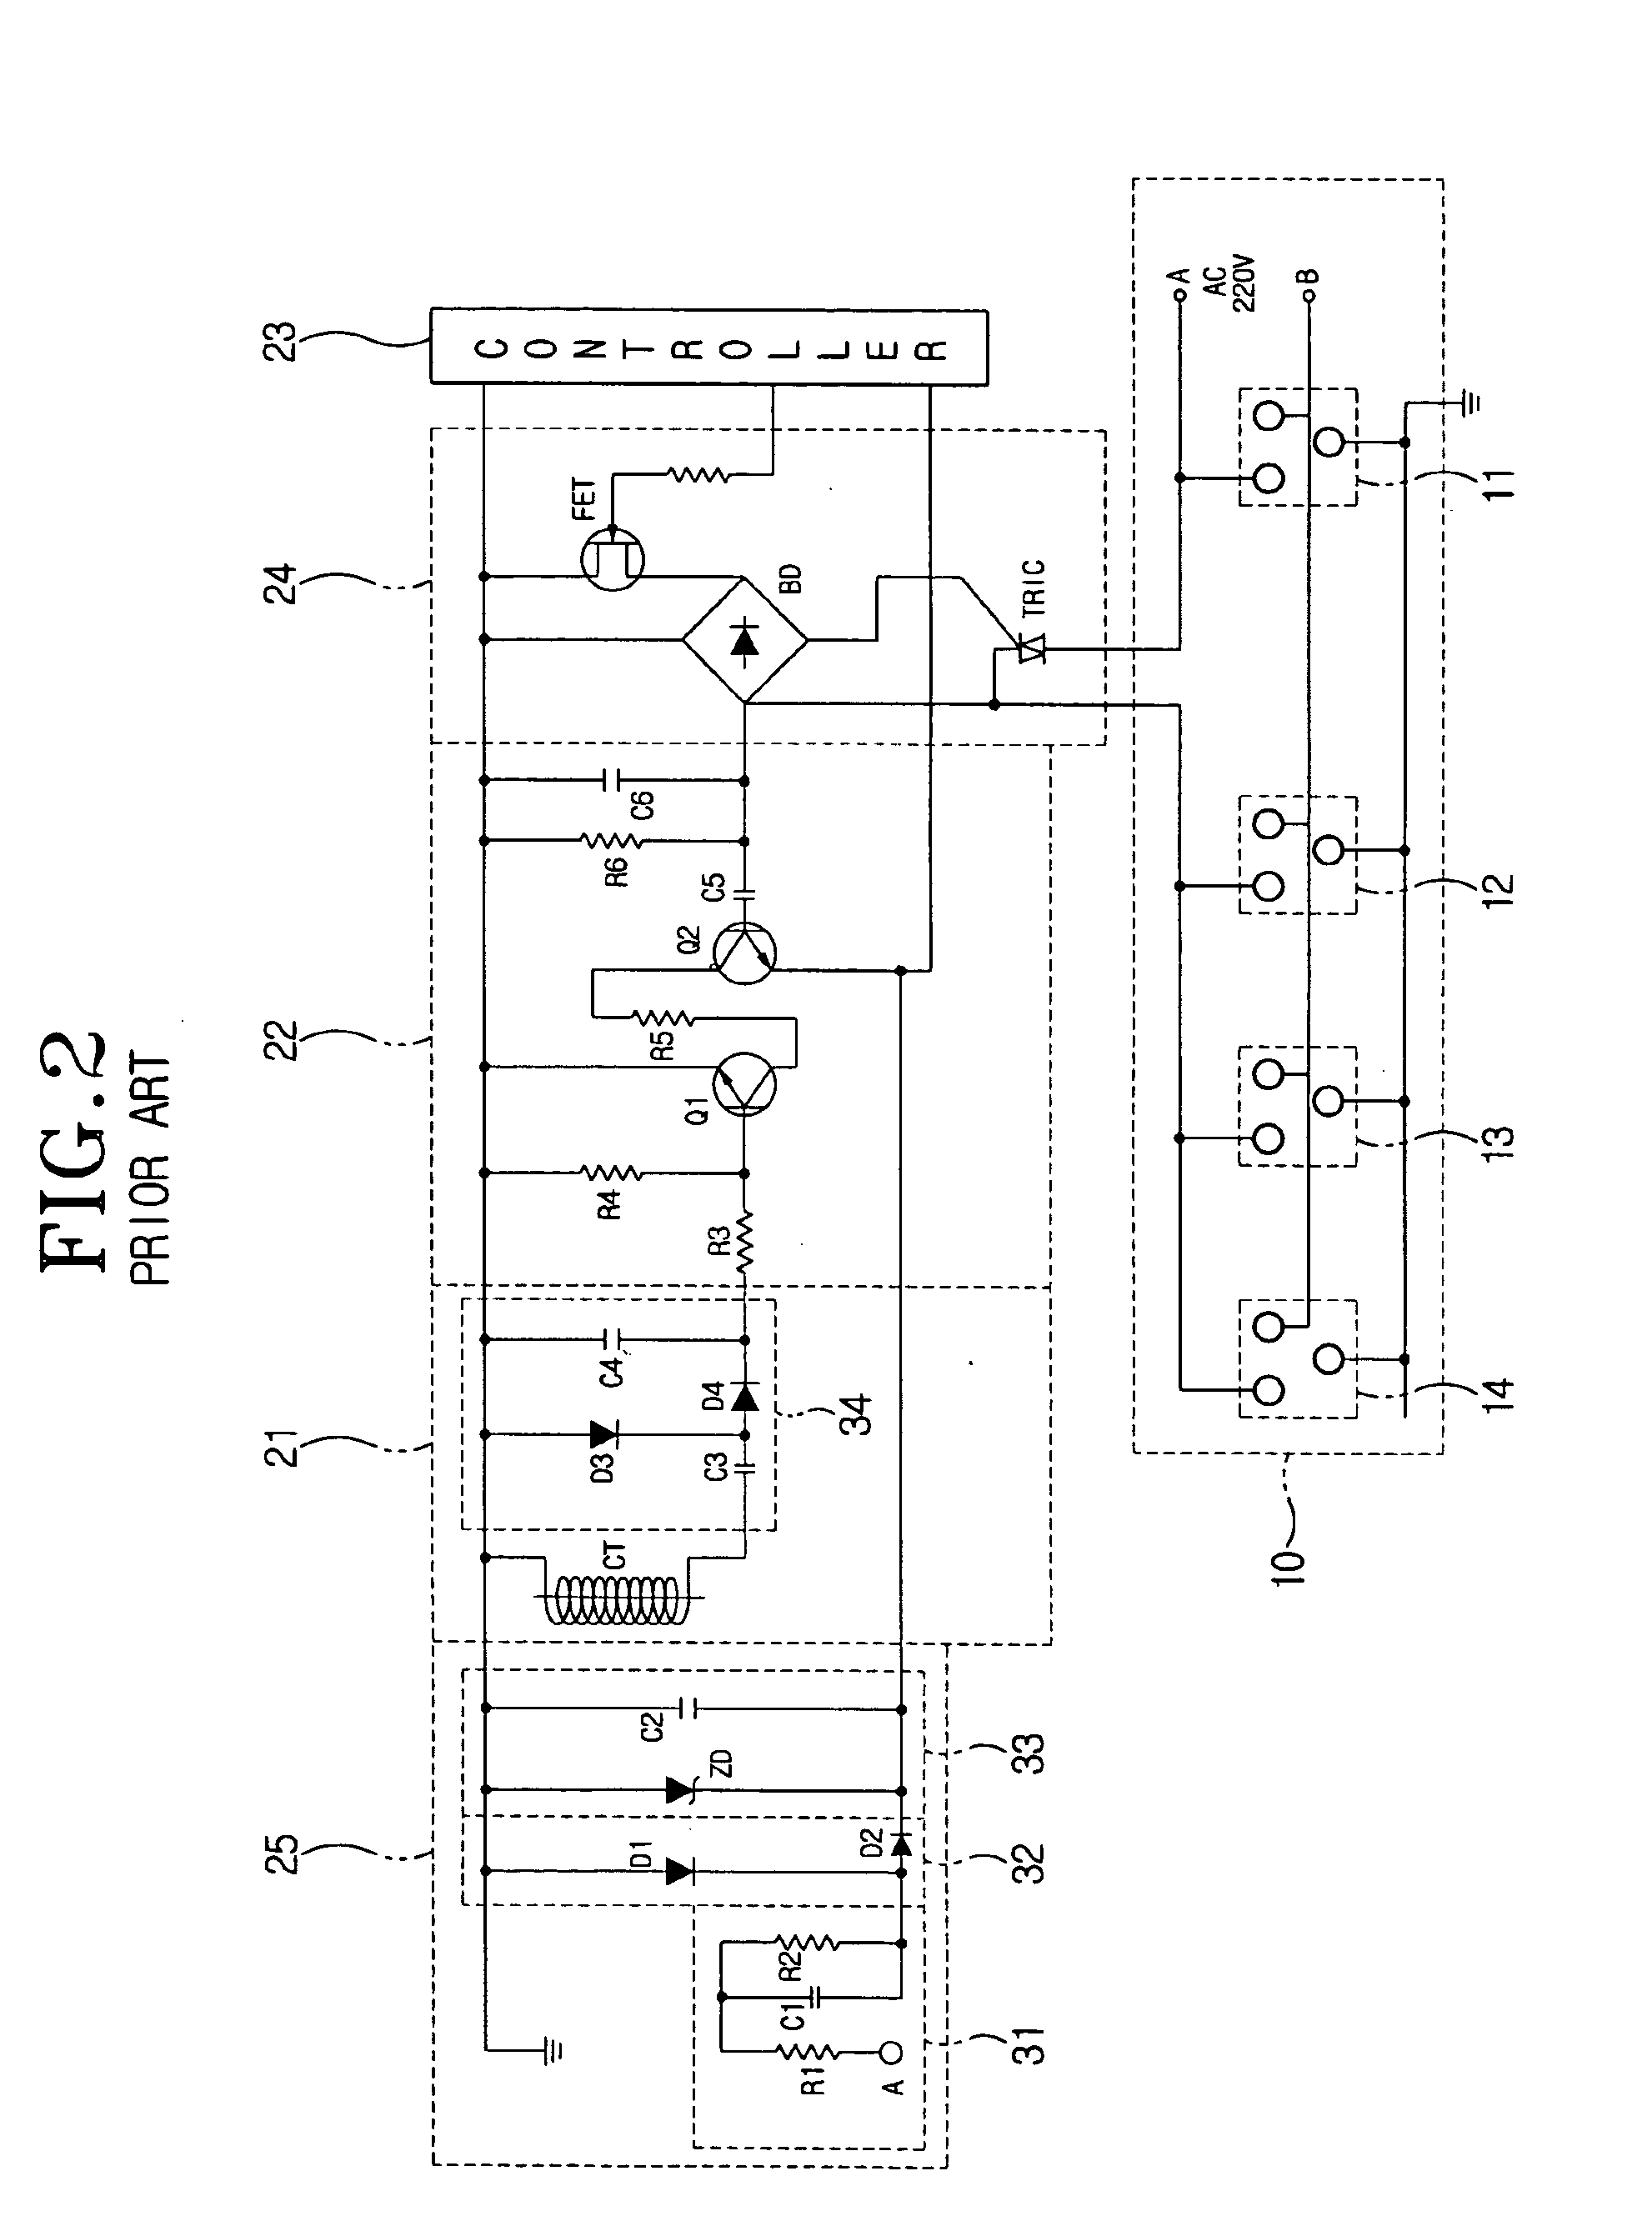 Apparatus for controlling multi-outlet power strip